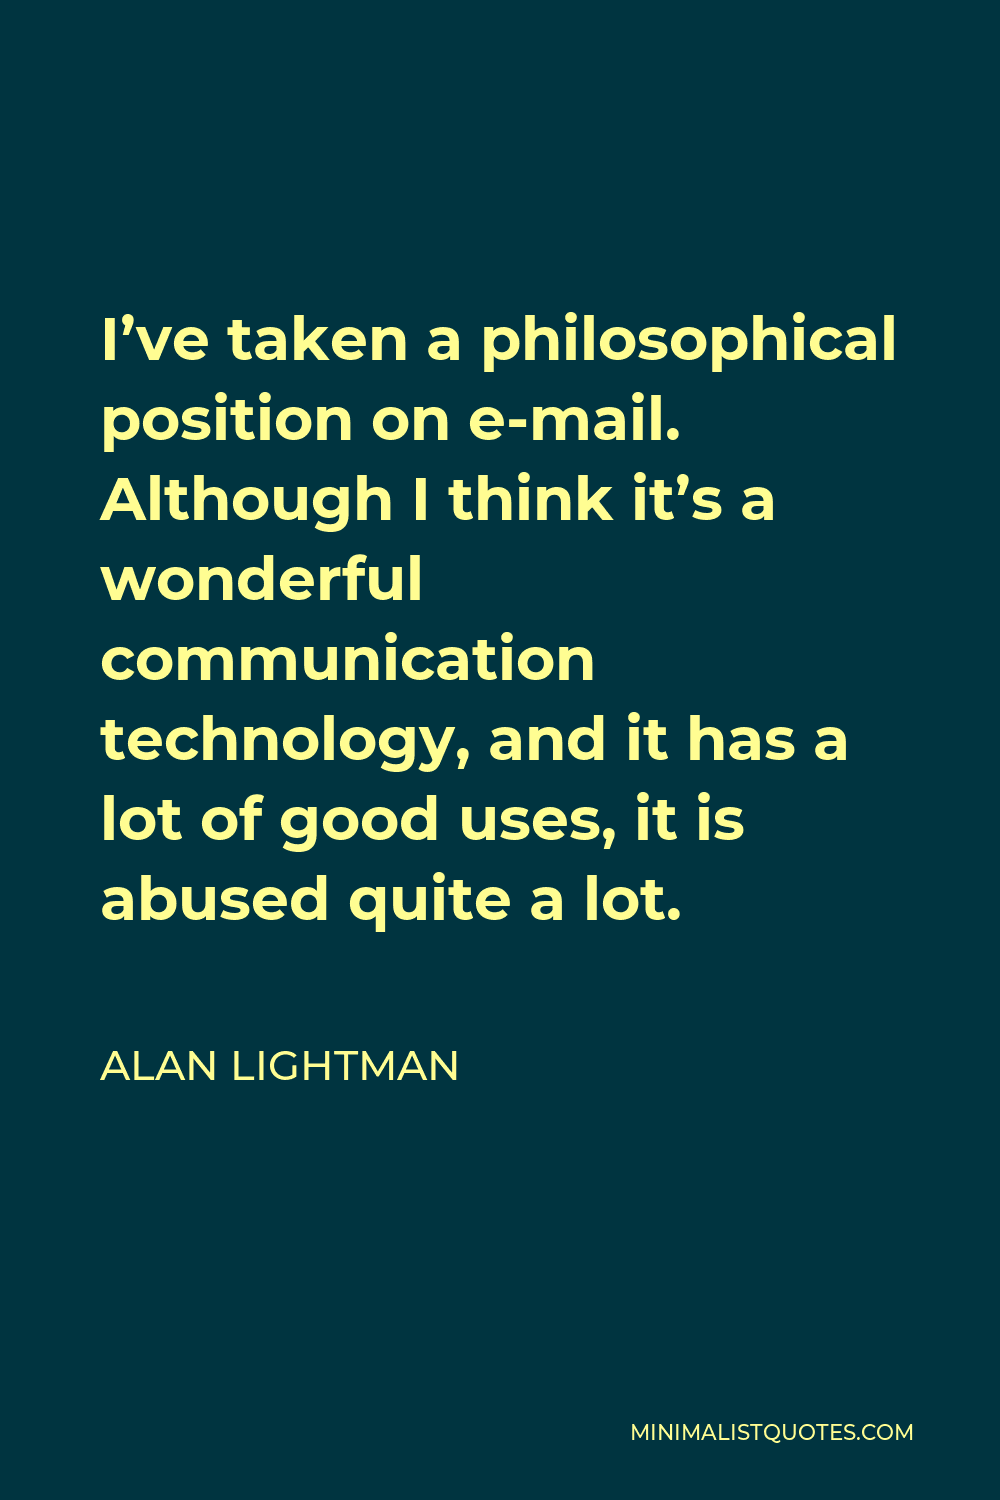 Alan Lightman Quote - I’ve taken a philosophical position on e-mail. Although I think it’s a wonderful communication technology, and it has a lot of good uses, it is abused quite a lot.